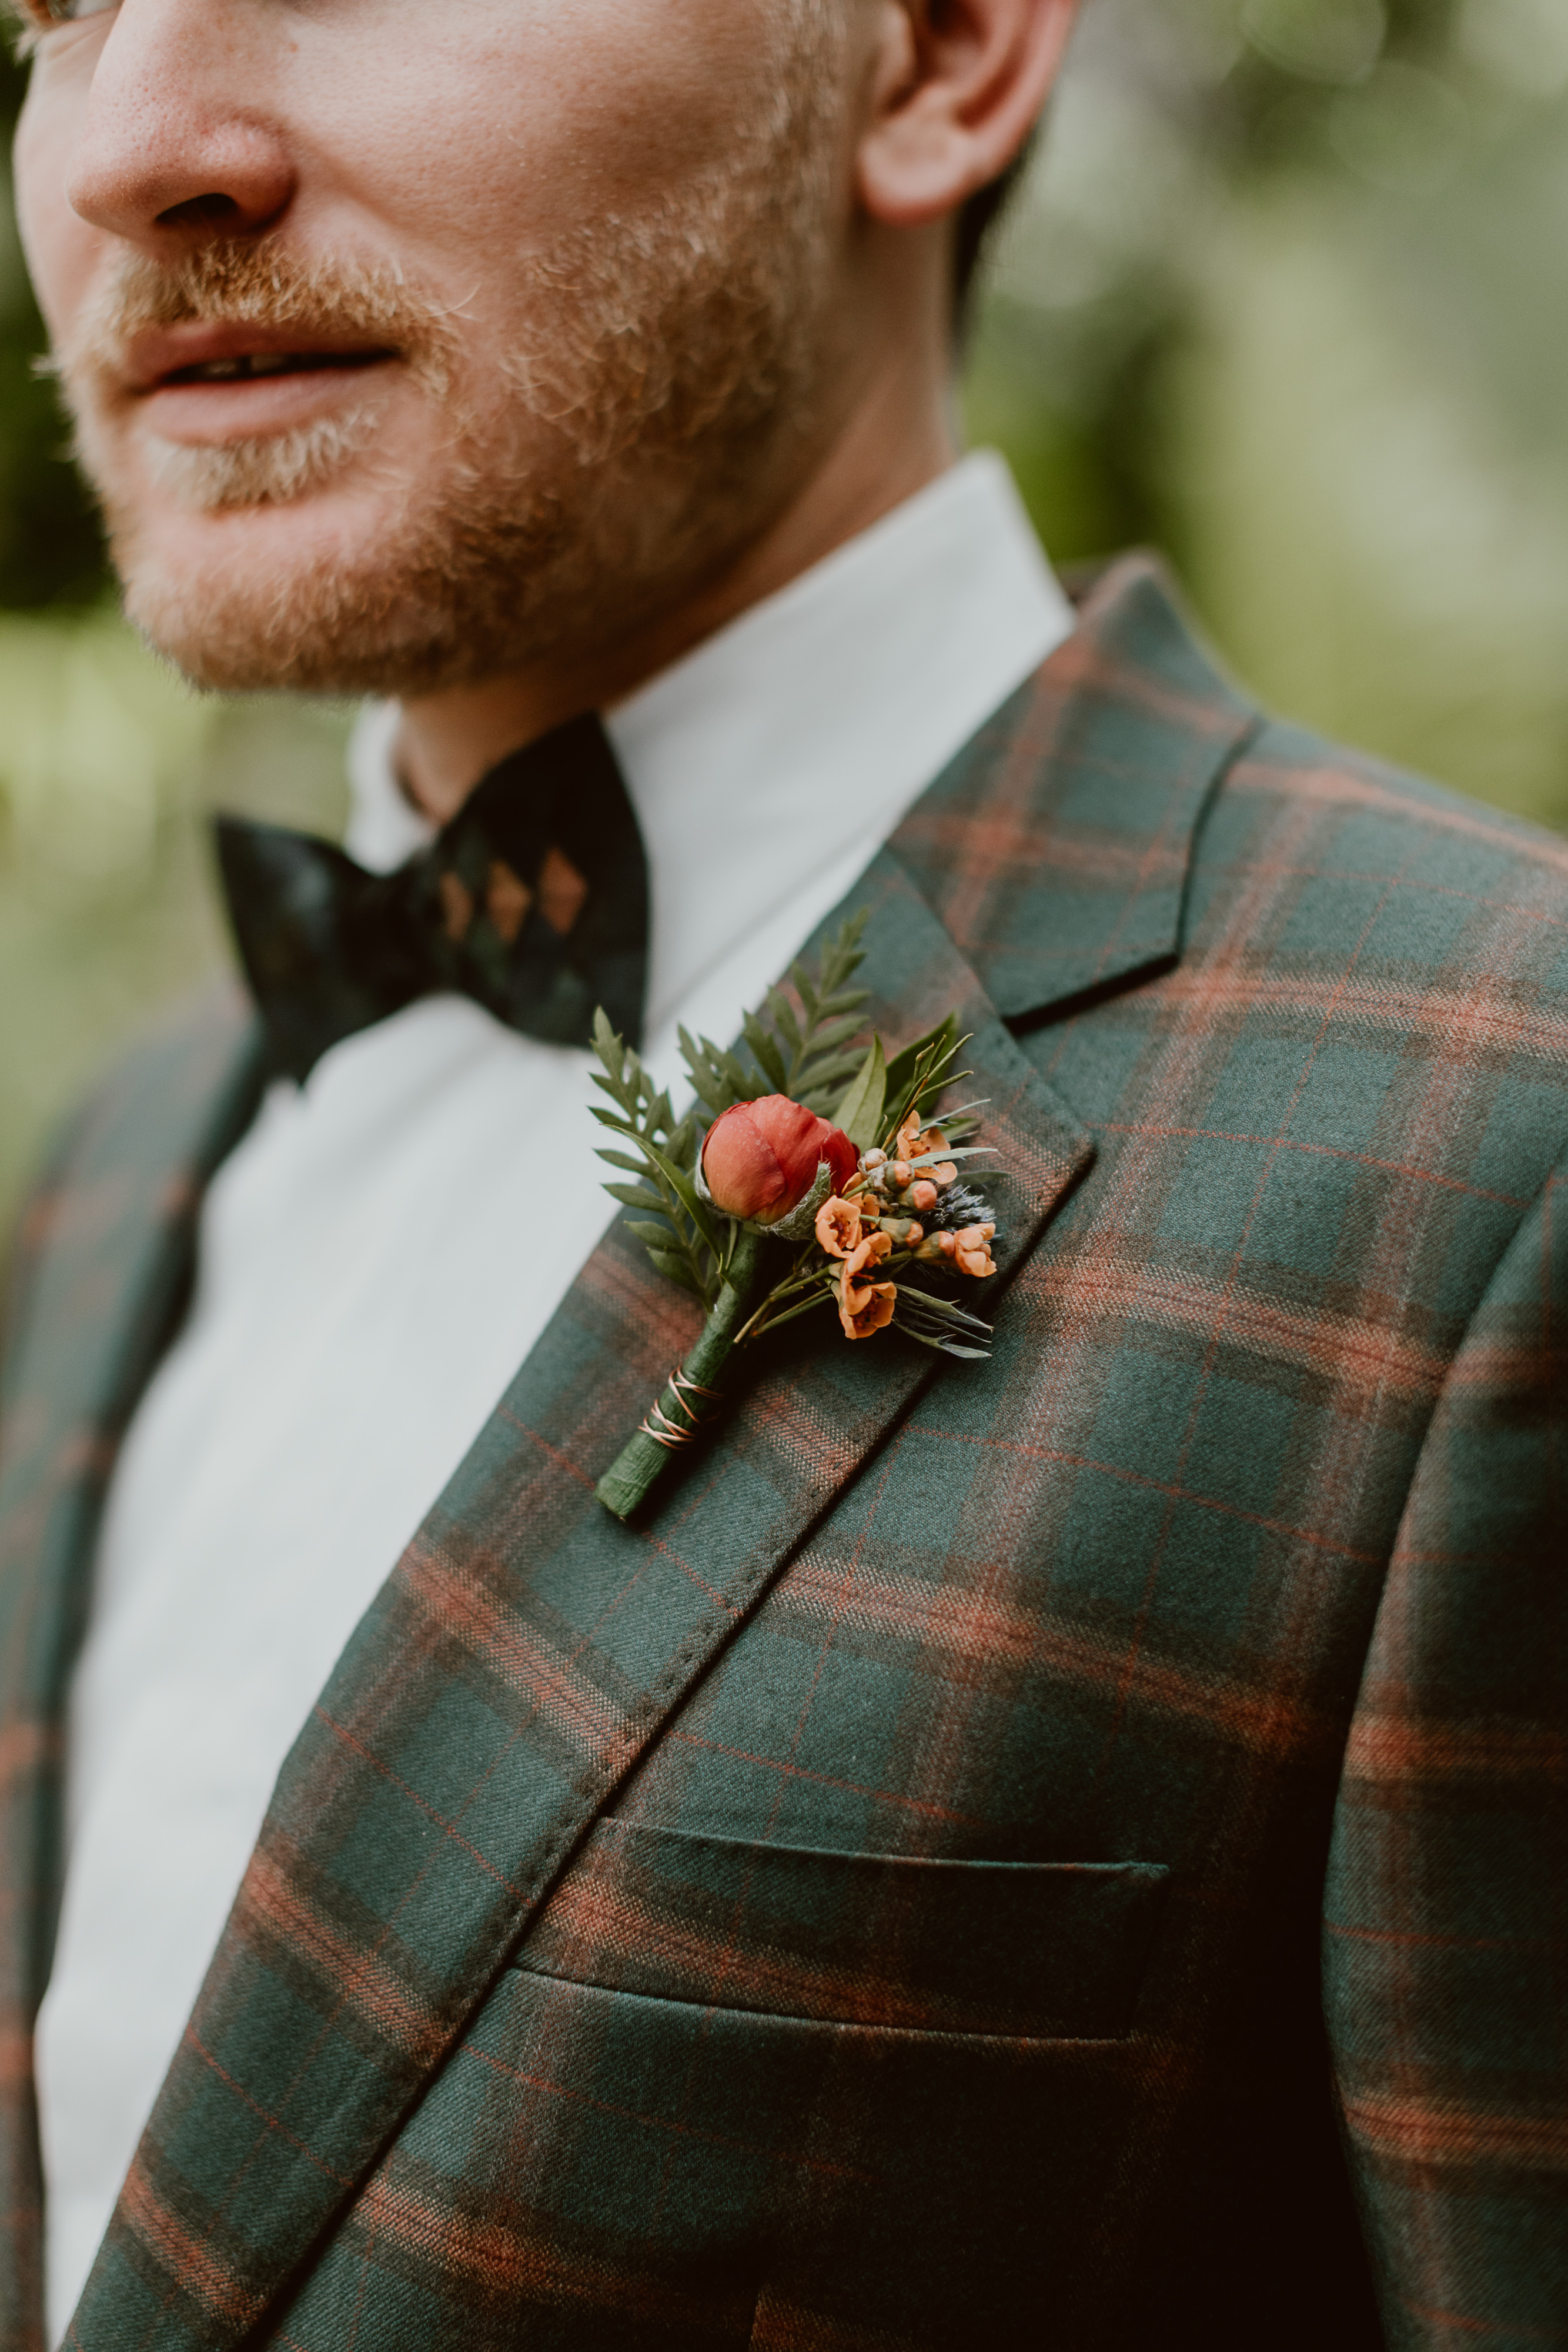 Our groom's boutonniere features a red ranunculus, thistle, and orange wax to match his tartan suit.